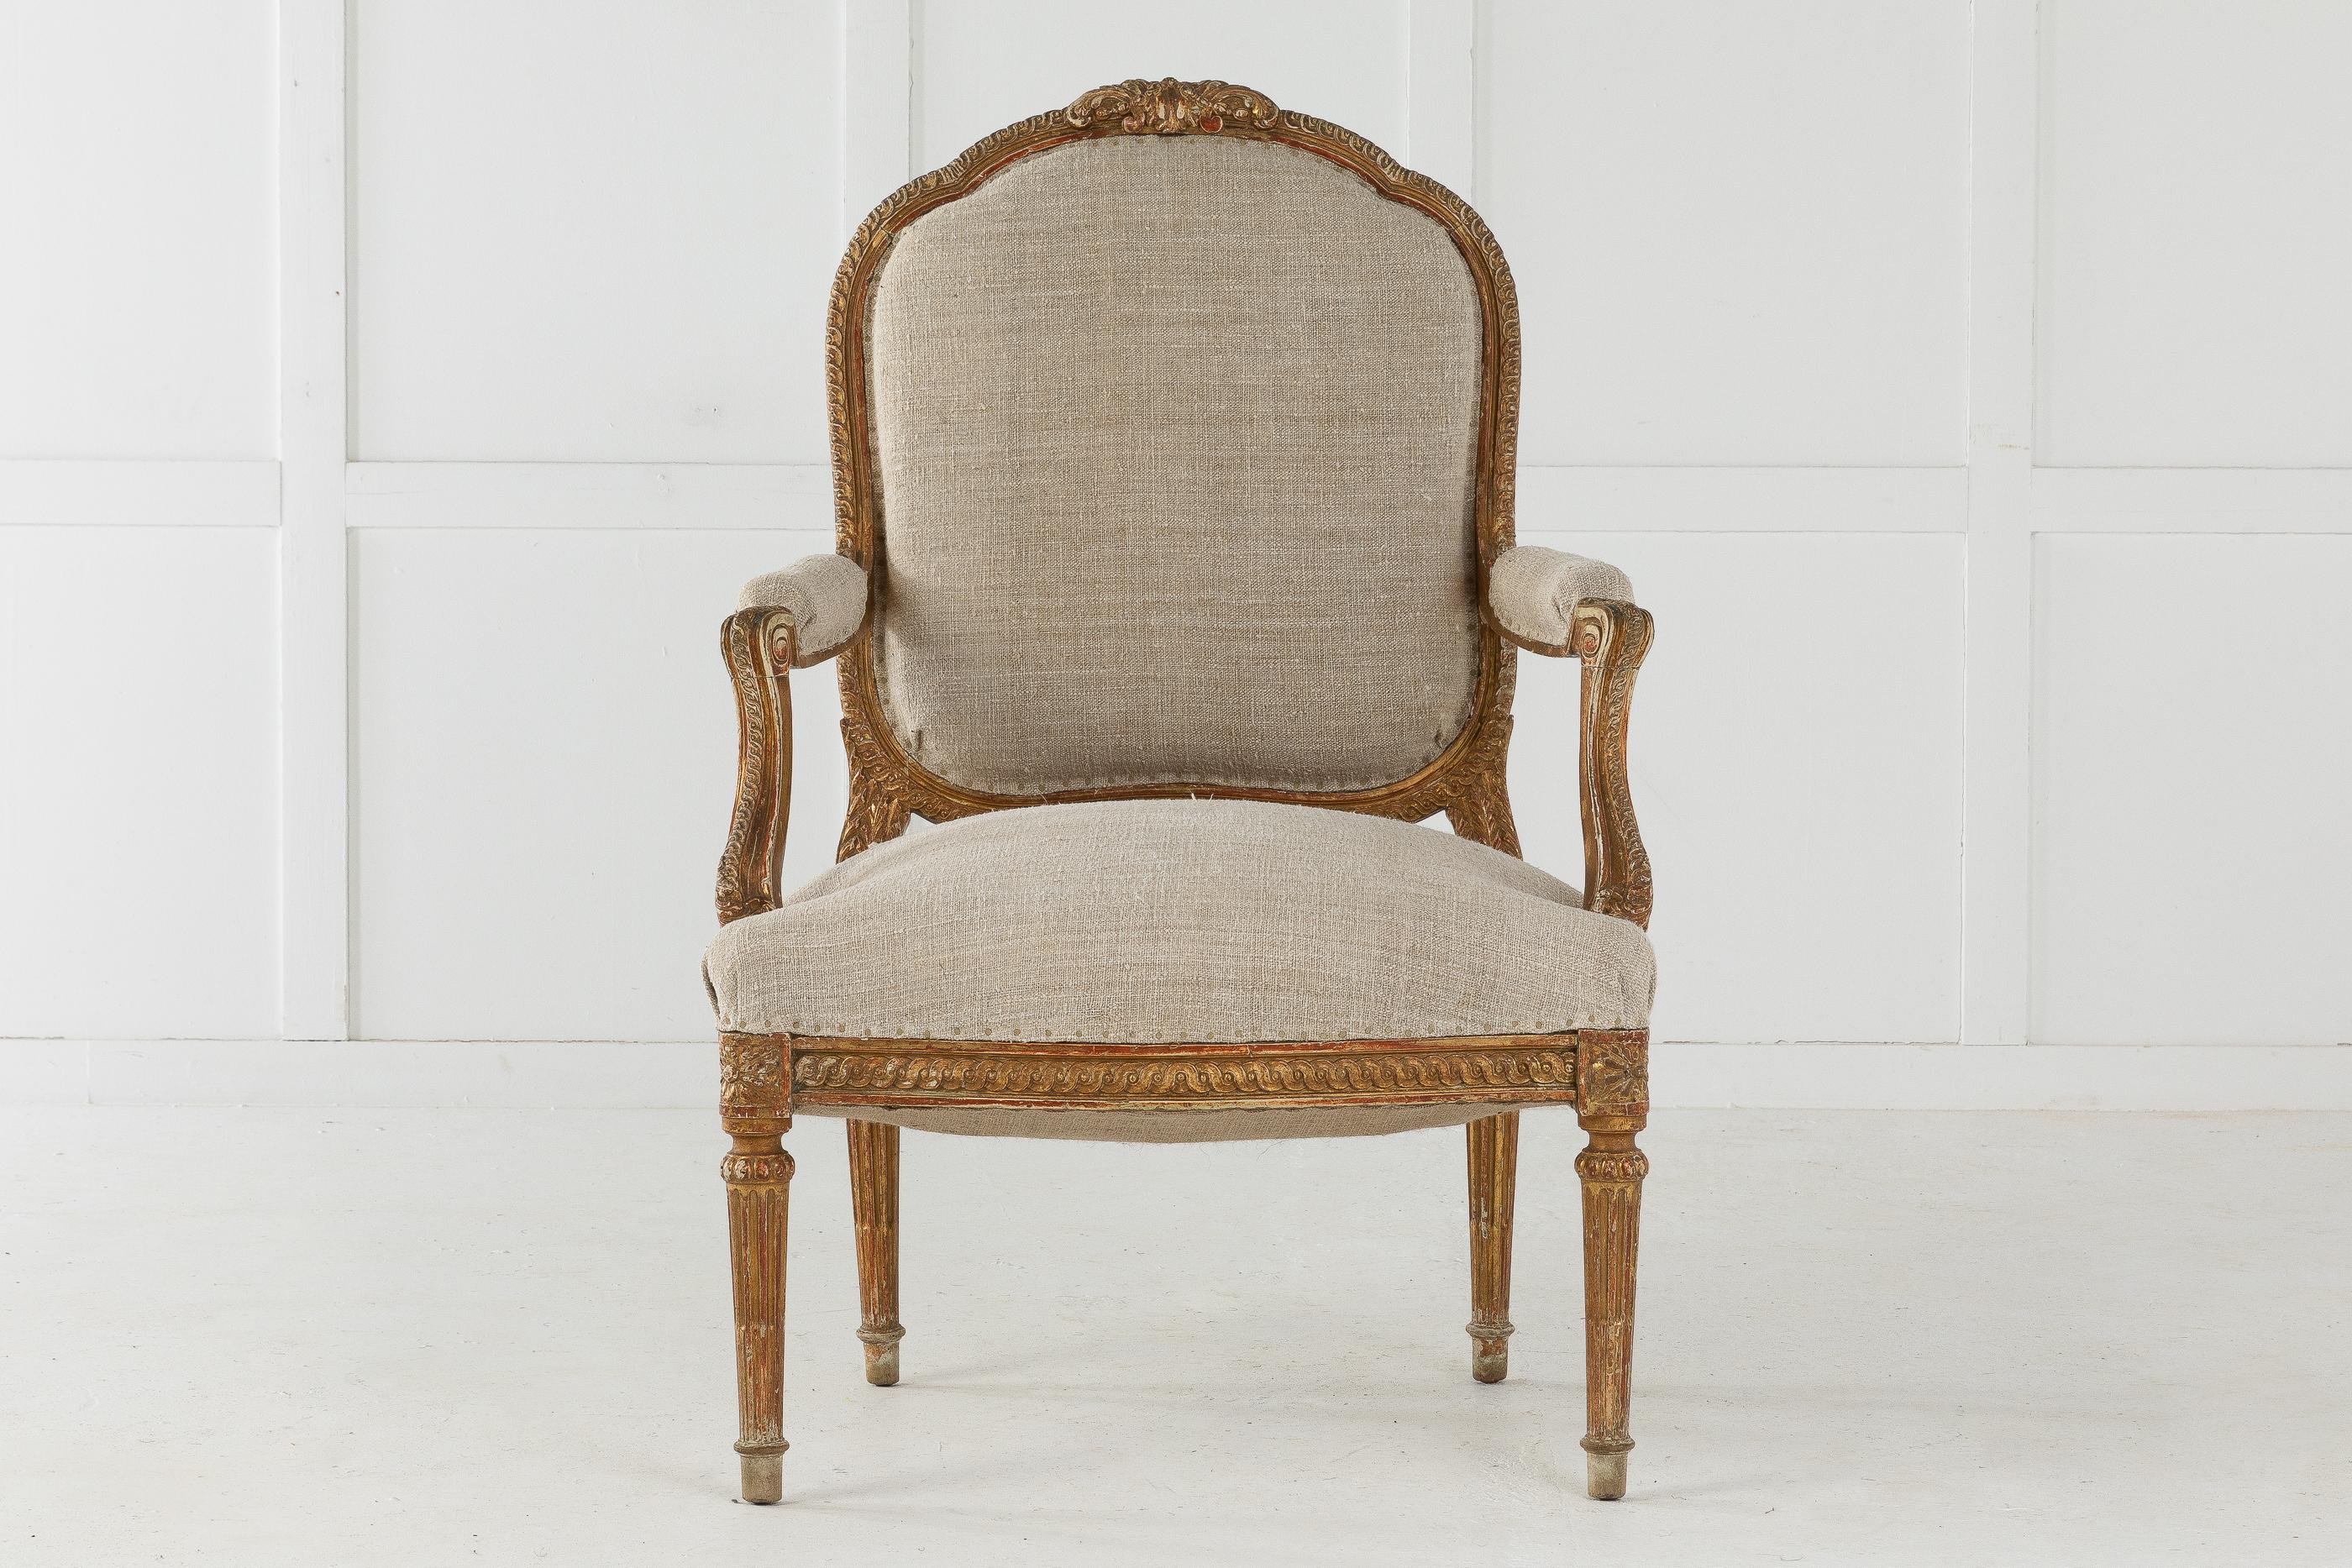 19th century French carved wood chair retaining beautiful aged gilt. Fully upholstered by us with antique fabric.